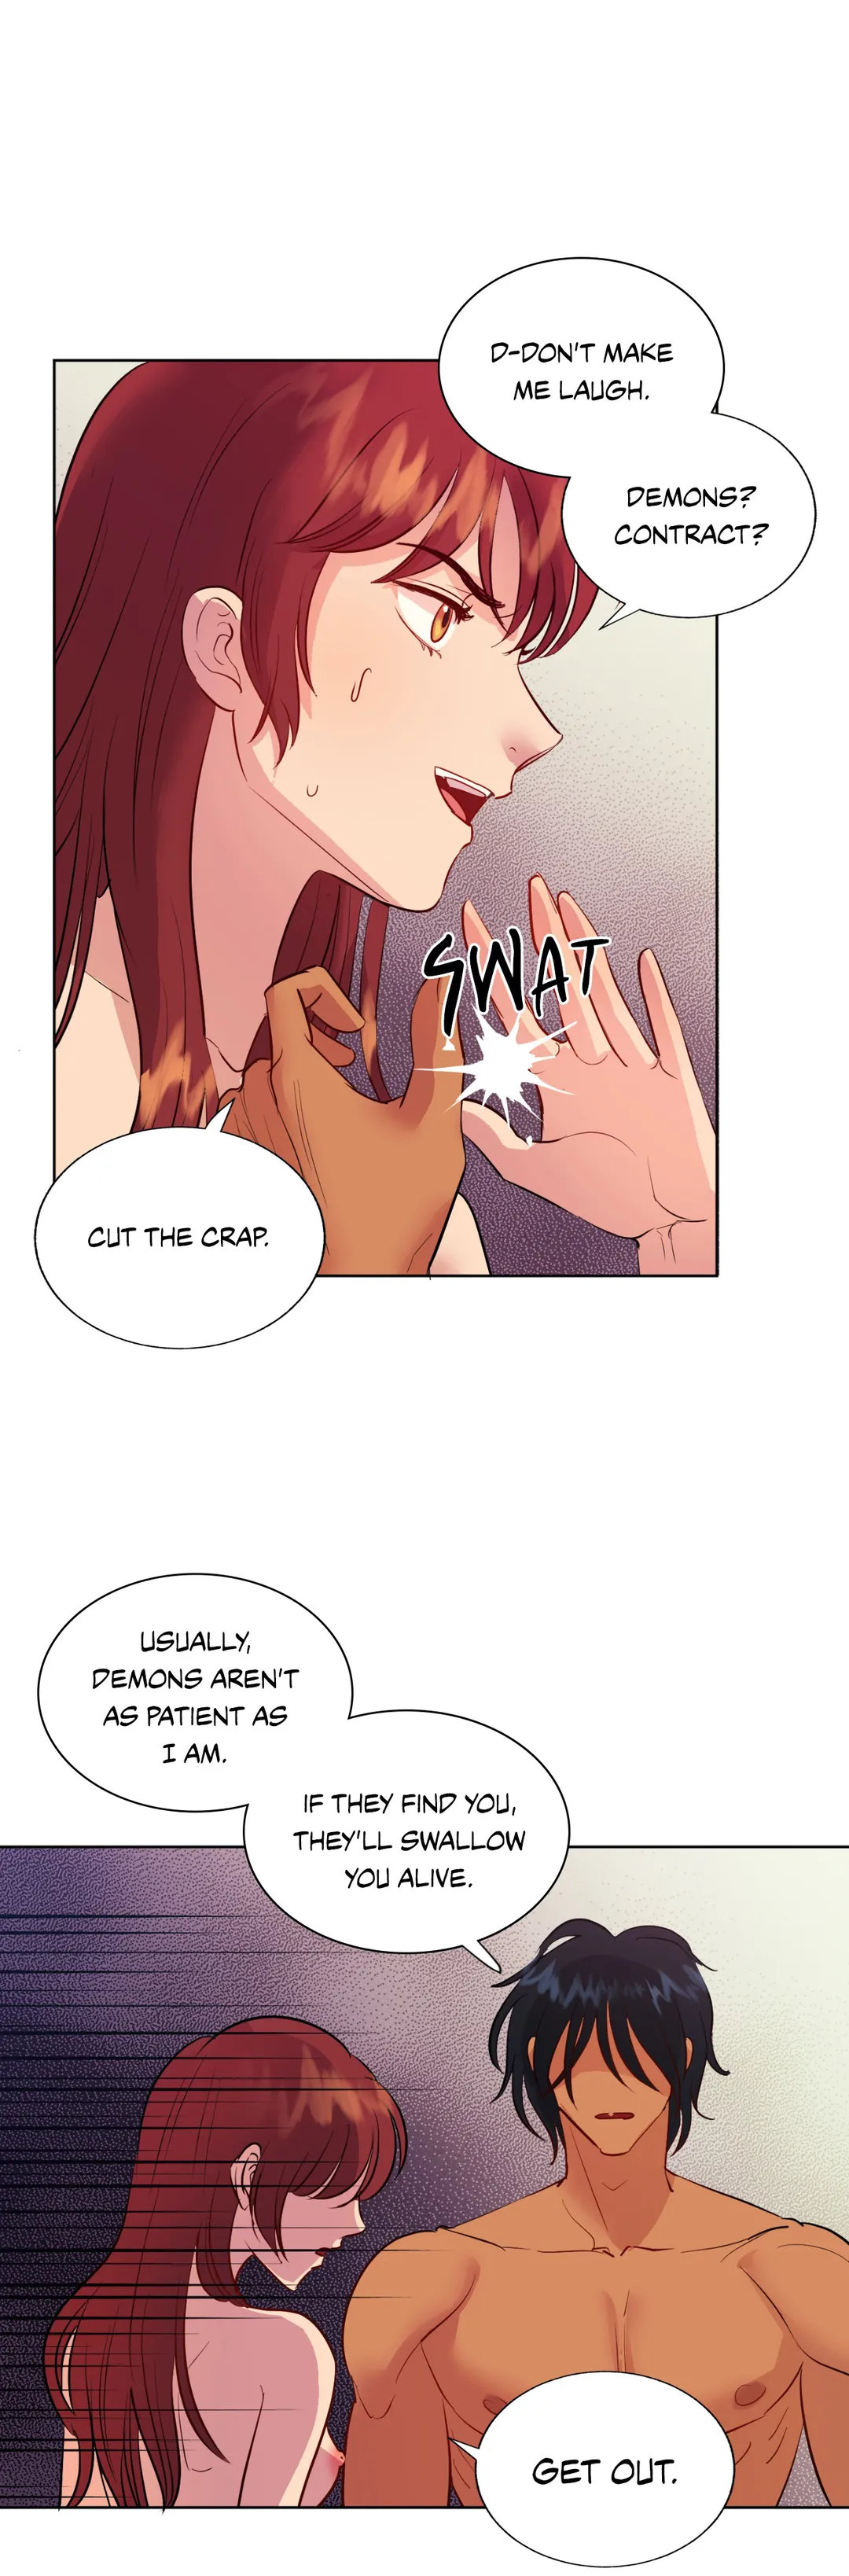 Hana’s Demons of Lust - Chapter 4 Page 26